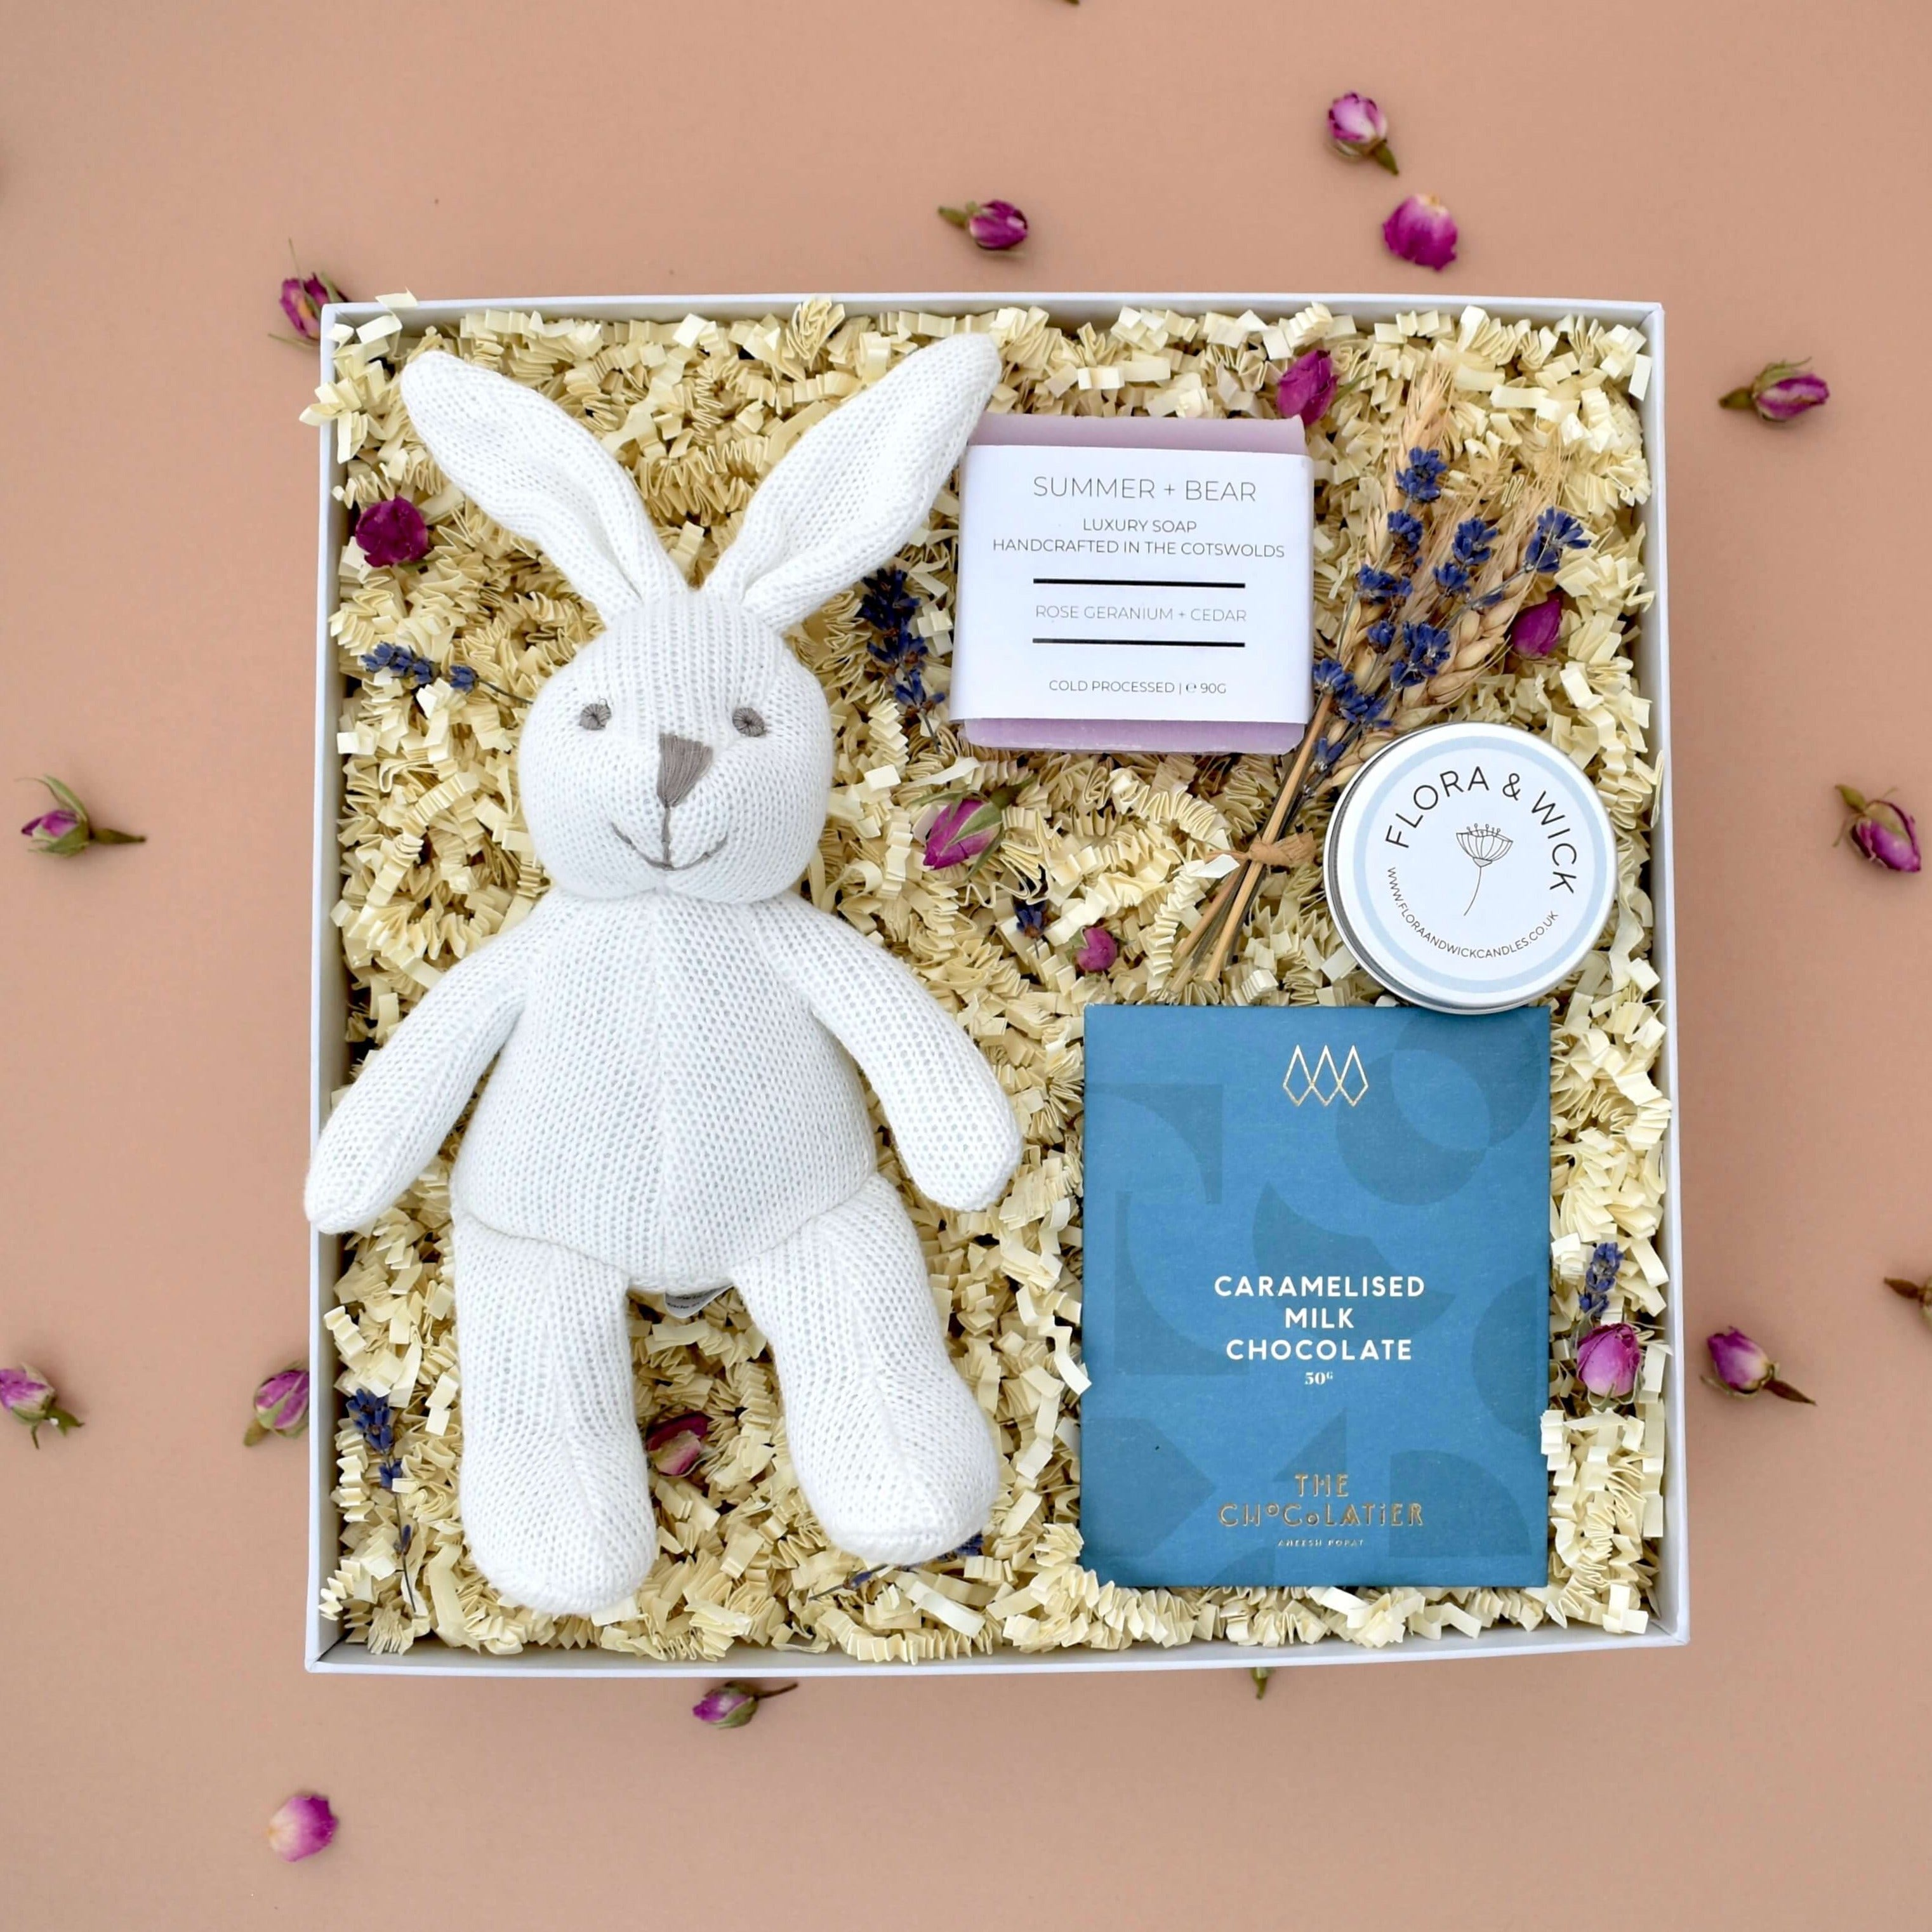 new mum and baby pamper luxury gift box. With organic baby bunny rattle, handmade rose geranium and cedar bar of soap, orchard blossom scented handmade tin candle, bar of caramelised milk chocolate, decorative keepsake floral arrangement.